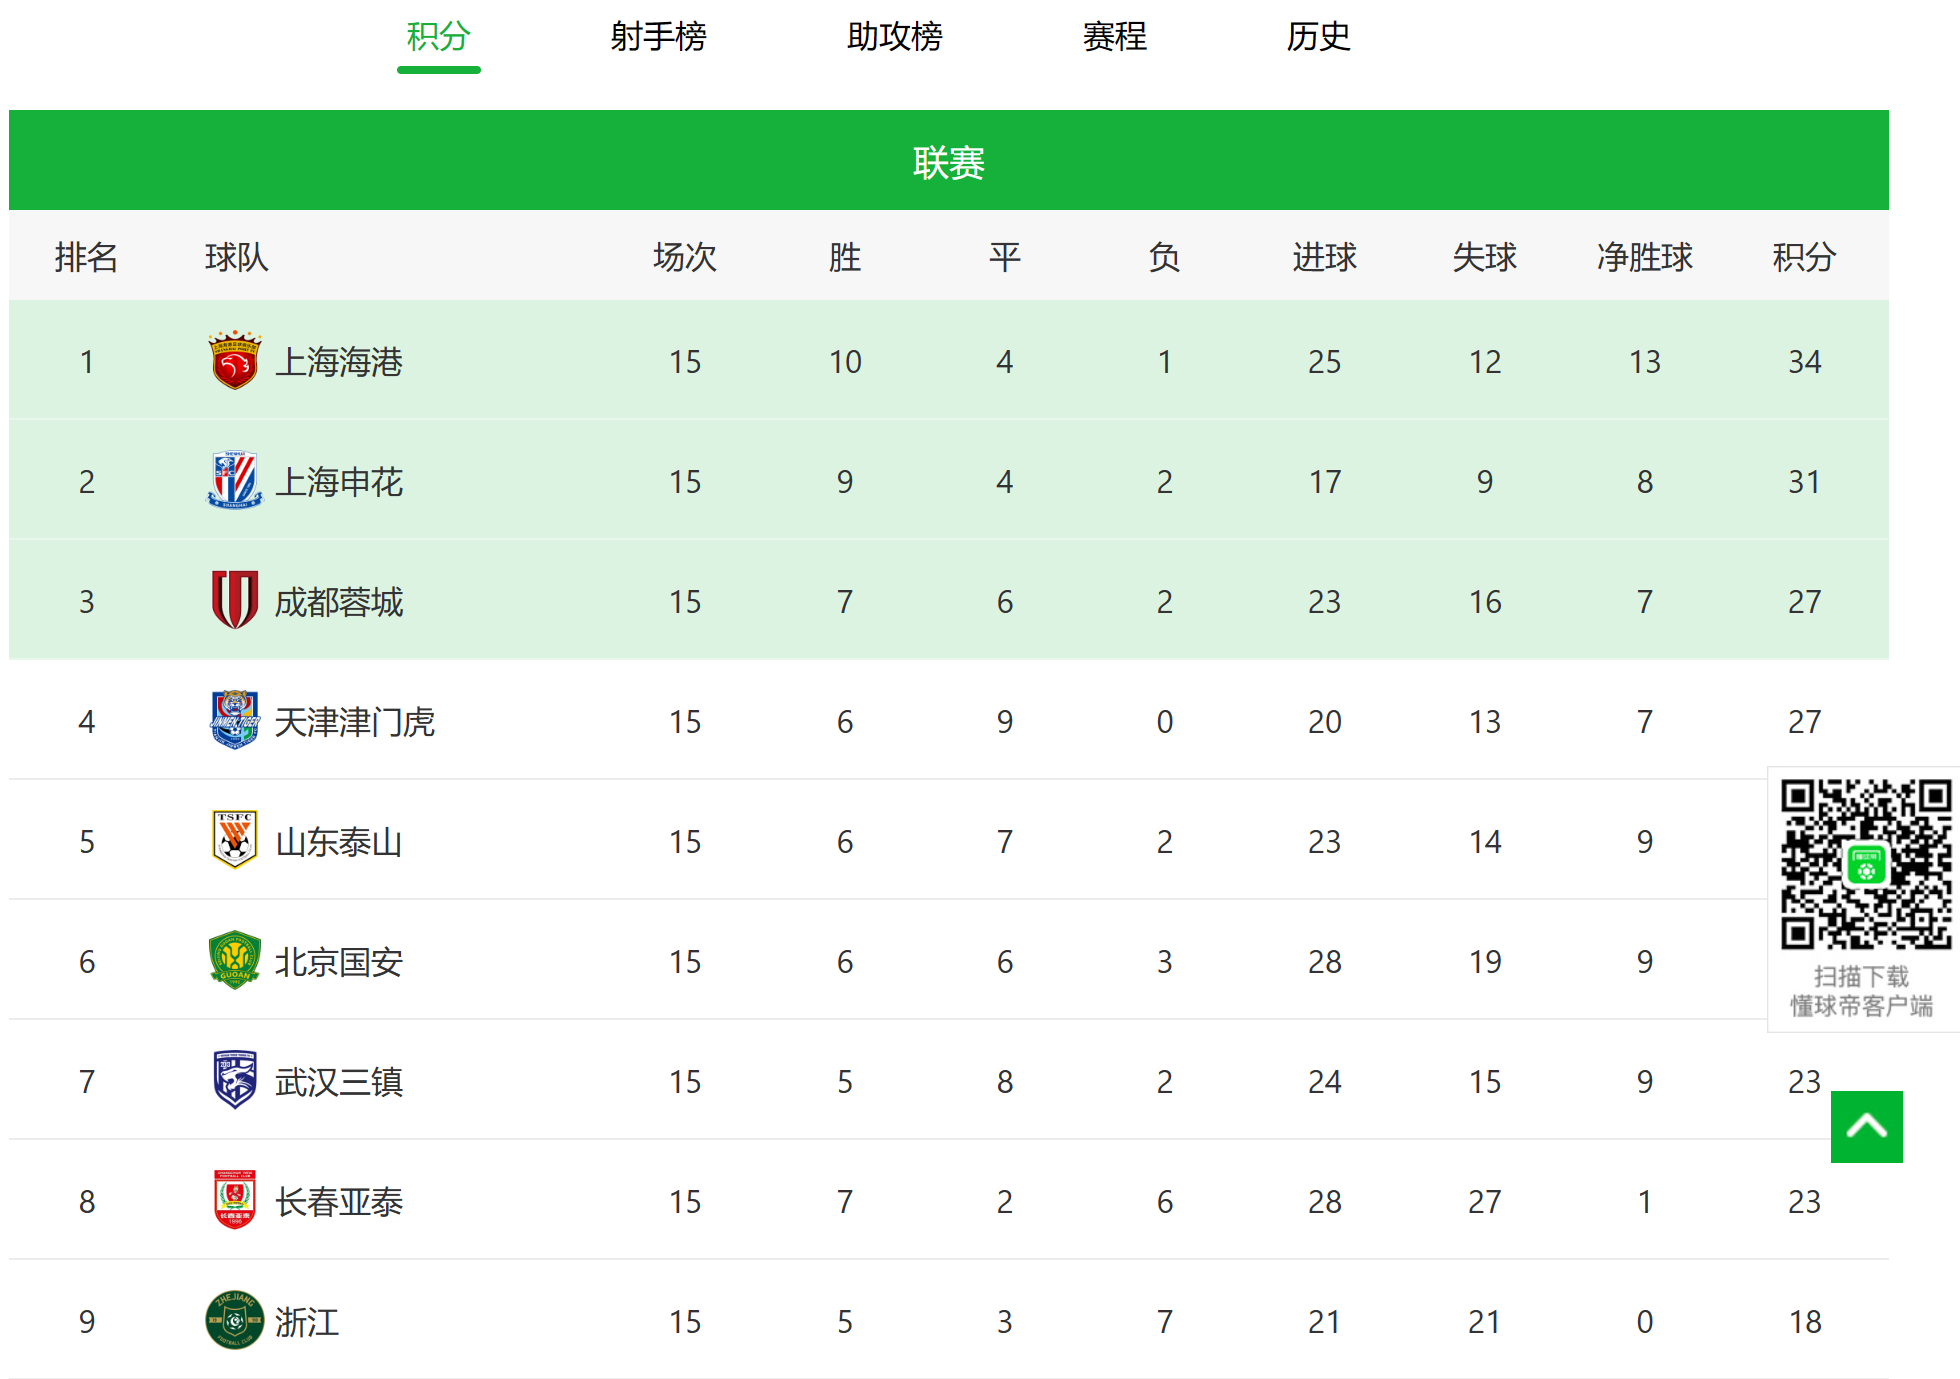 But why do fans still angrily criticize "Javier's dismissal"?, Haigang leads the points table, observation: China Super League half way, half way | home | points table